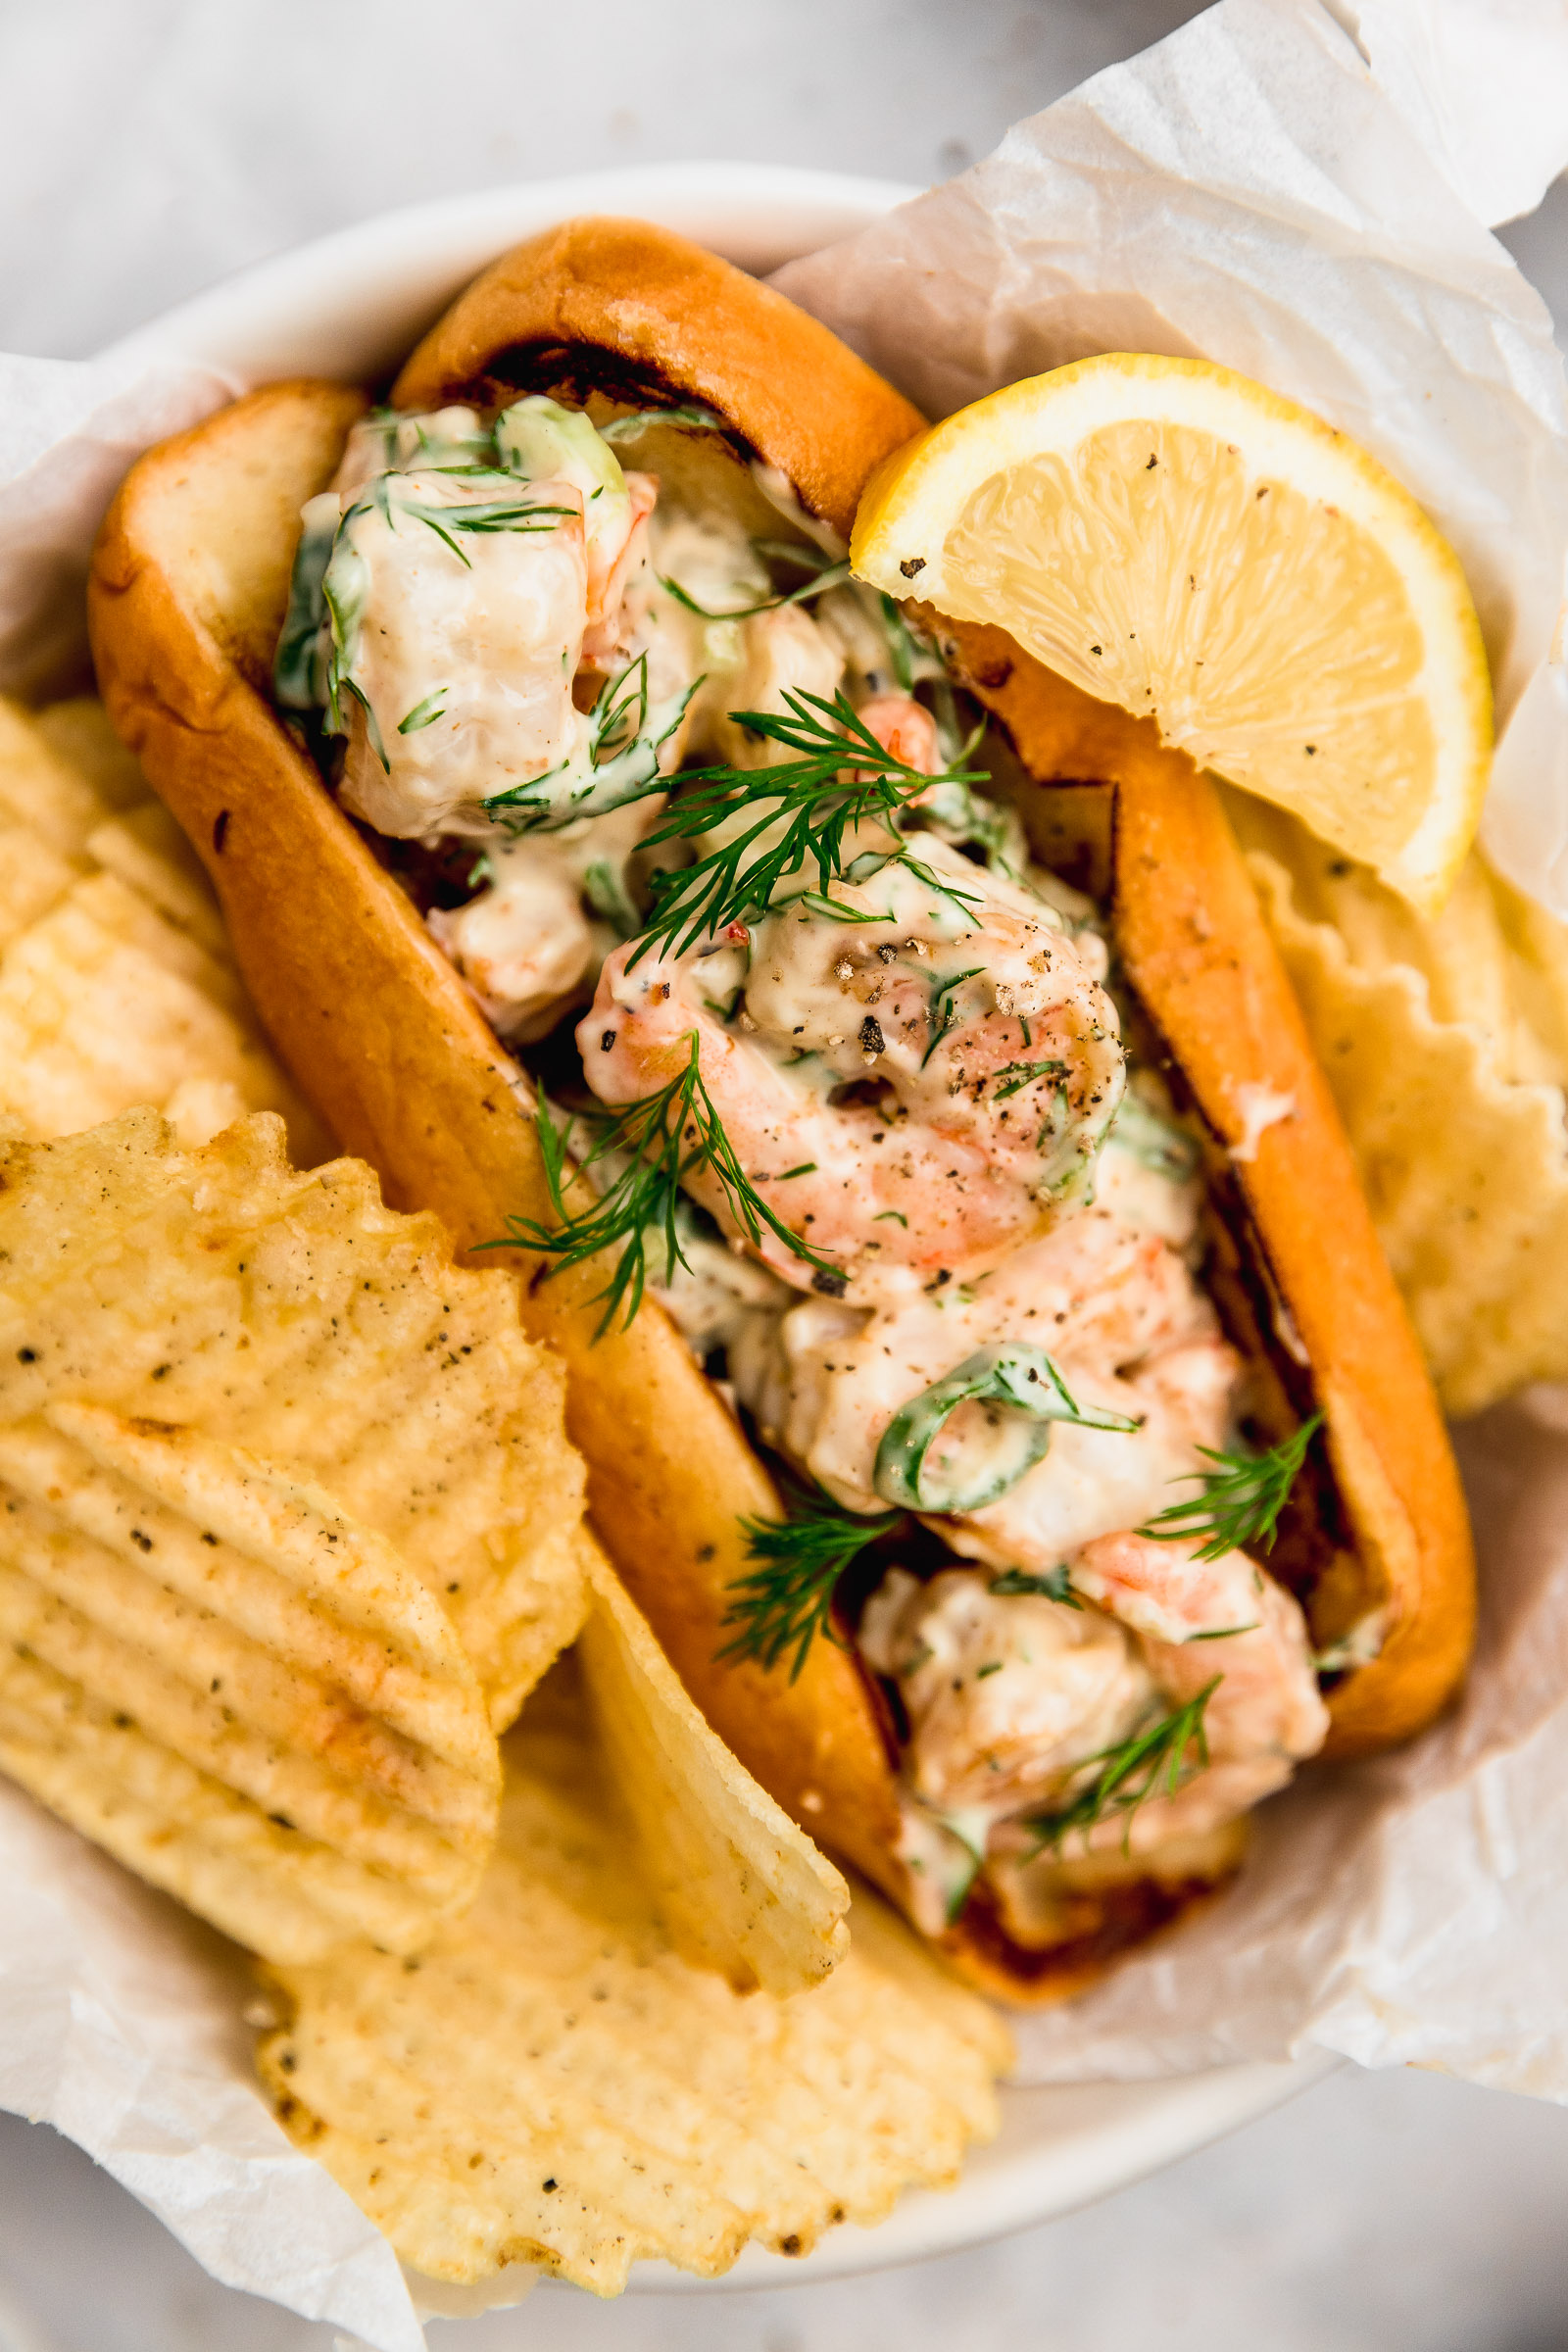 Closeup of a Shrimp Salad Sandwich in a hot dog bun, with extra dill on top and served with a side of chips and a lemon wedge.